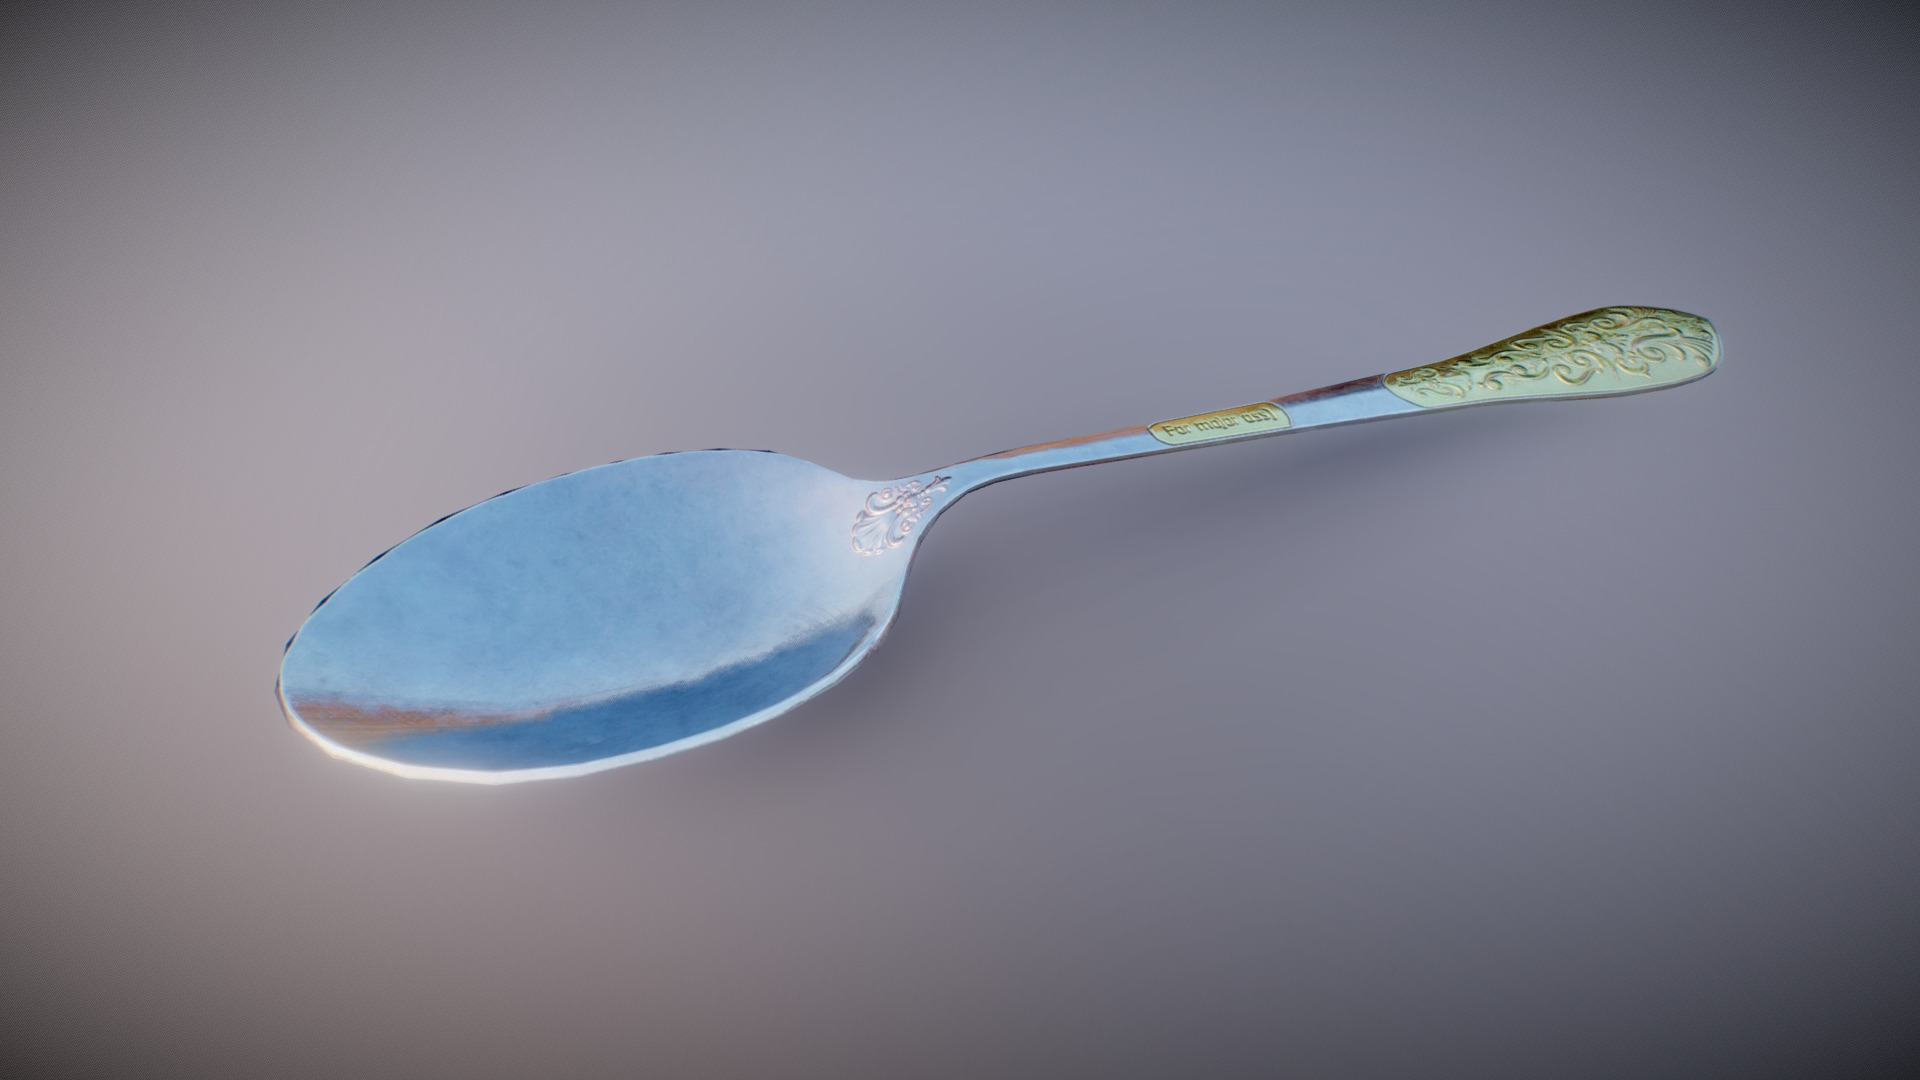 3D model Spoon for majors)) - This is a 3D model of the Spoon for majors)). The 3D model is about a blue and white toothbrush.